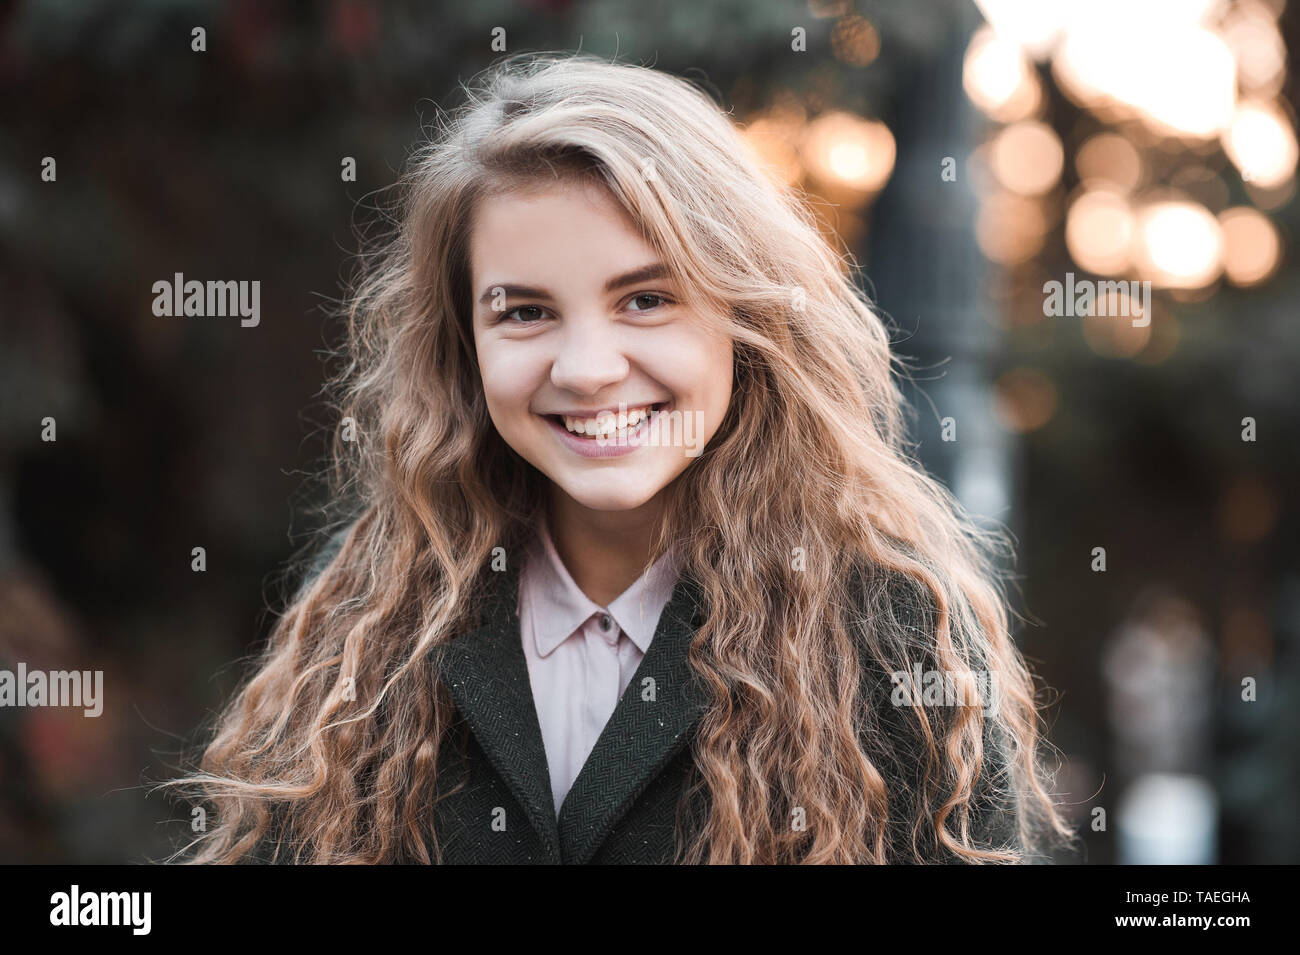 Smiling Blonde Teen Girl 1416 Year Old With Curly Hair